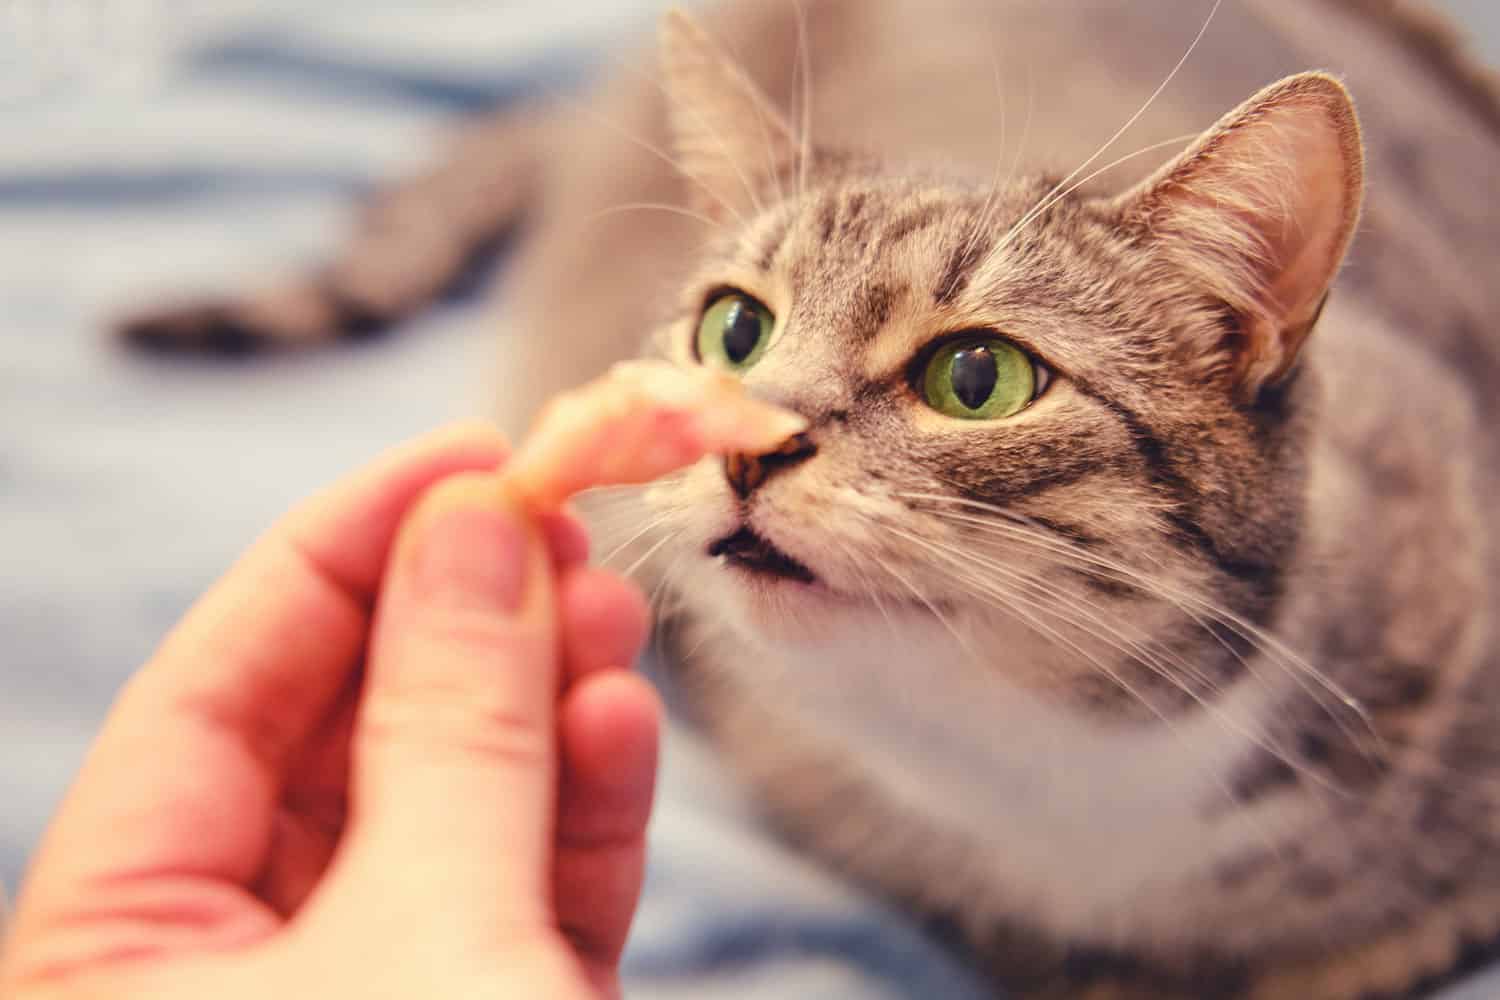 Giving cat chicken meat